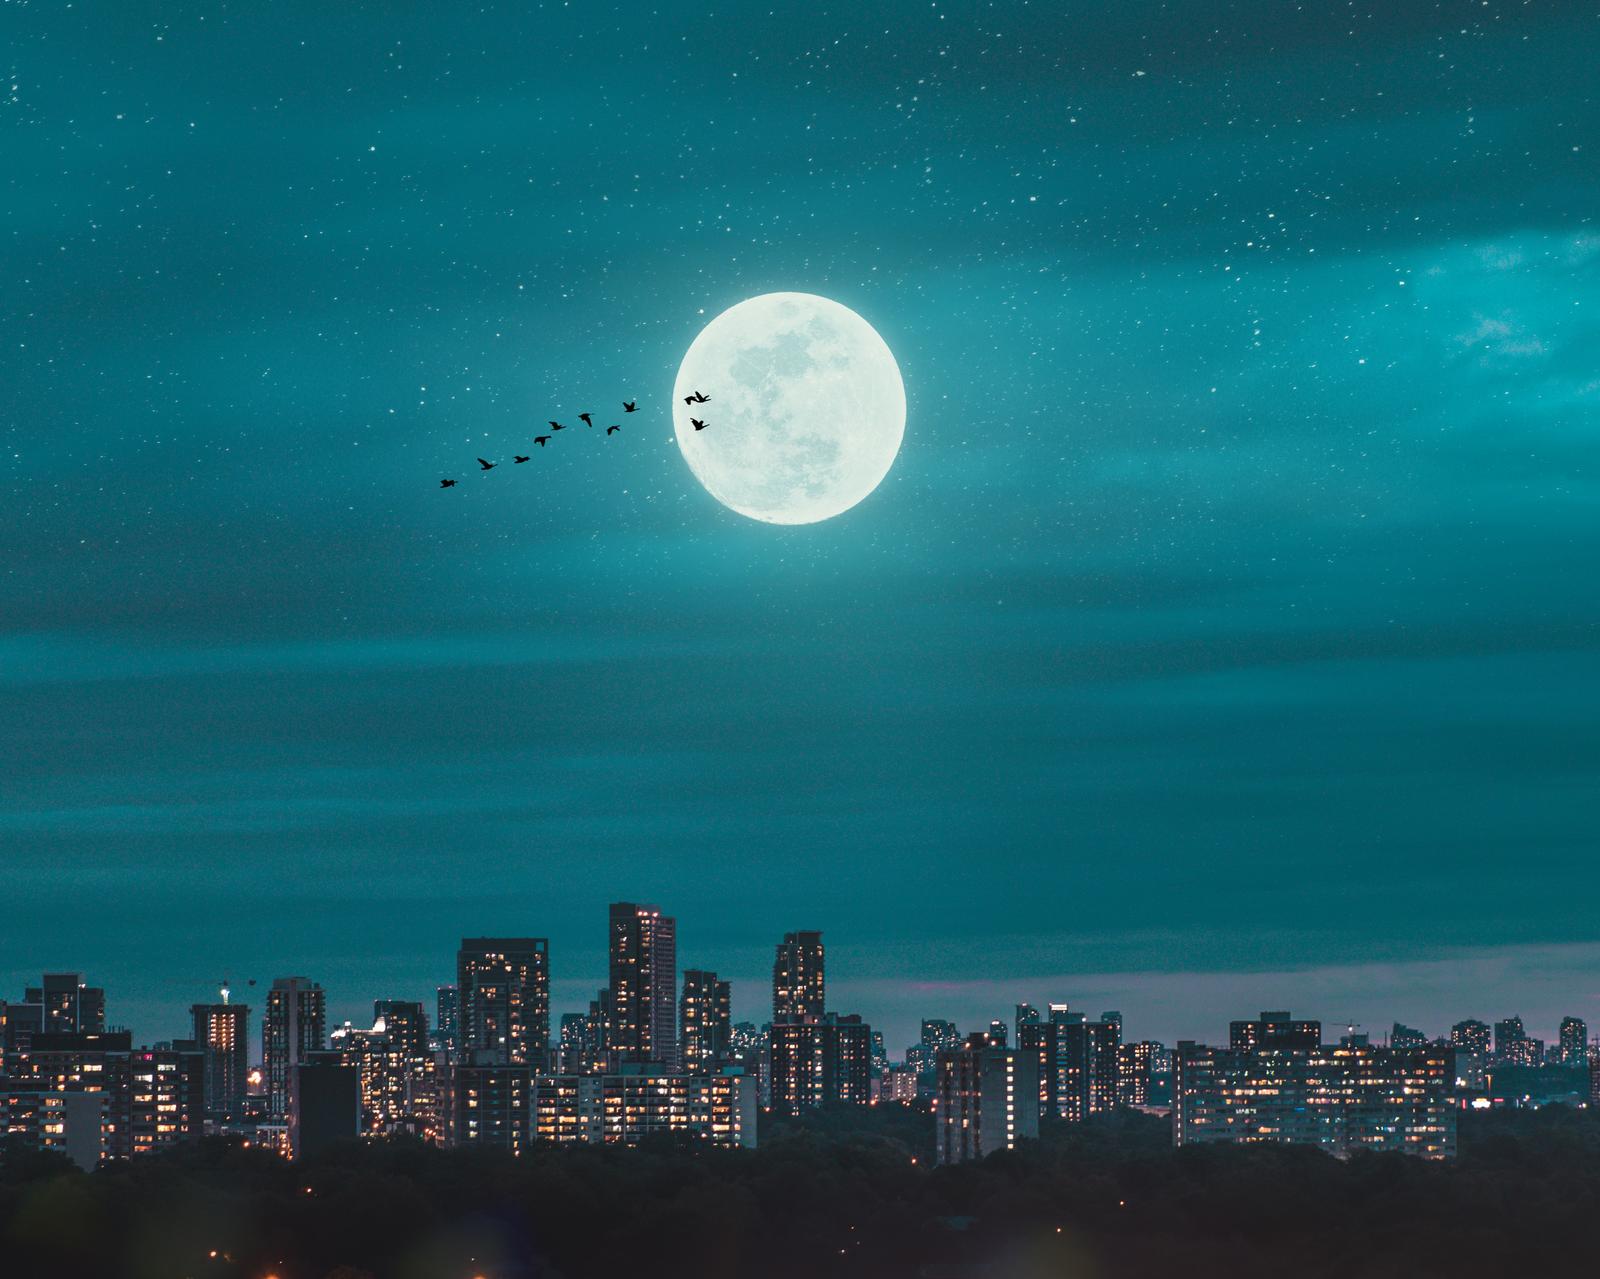 If You Can Get More Than 15/20 on This Test, You’re a Mythology Master Full moon over city skyline during night time